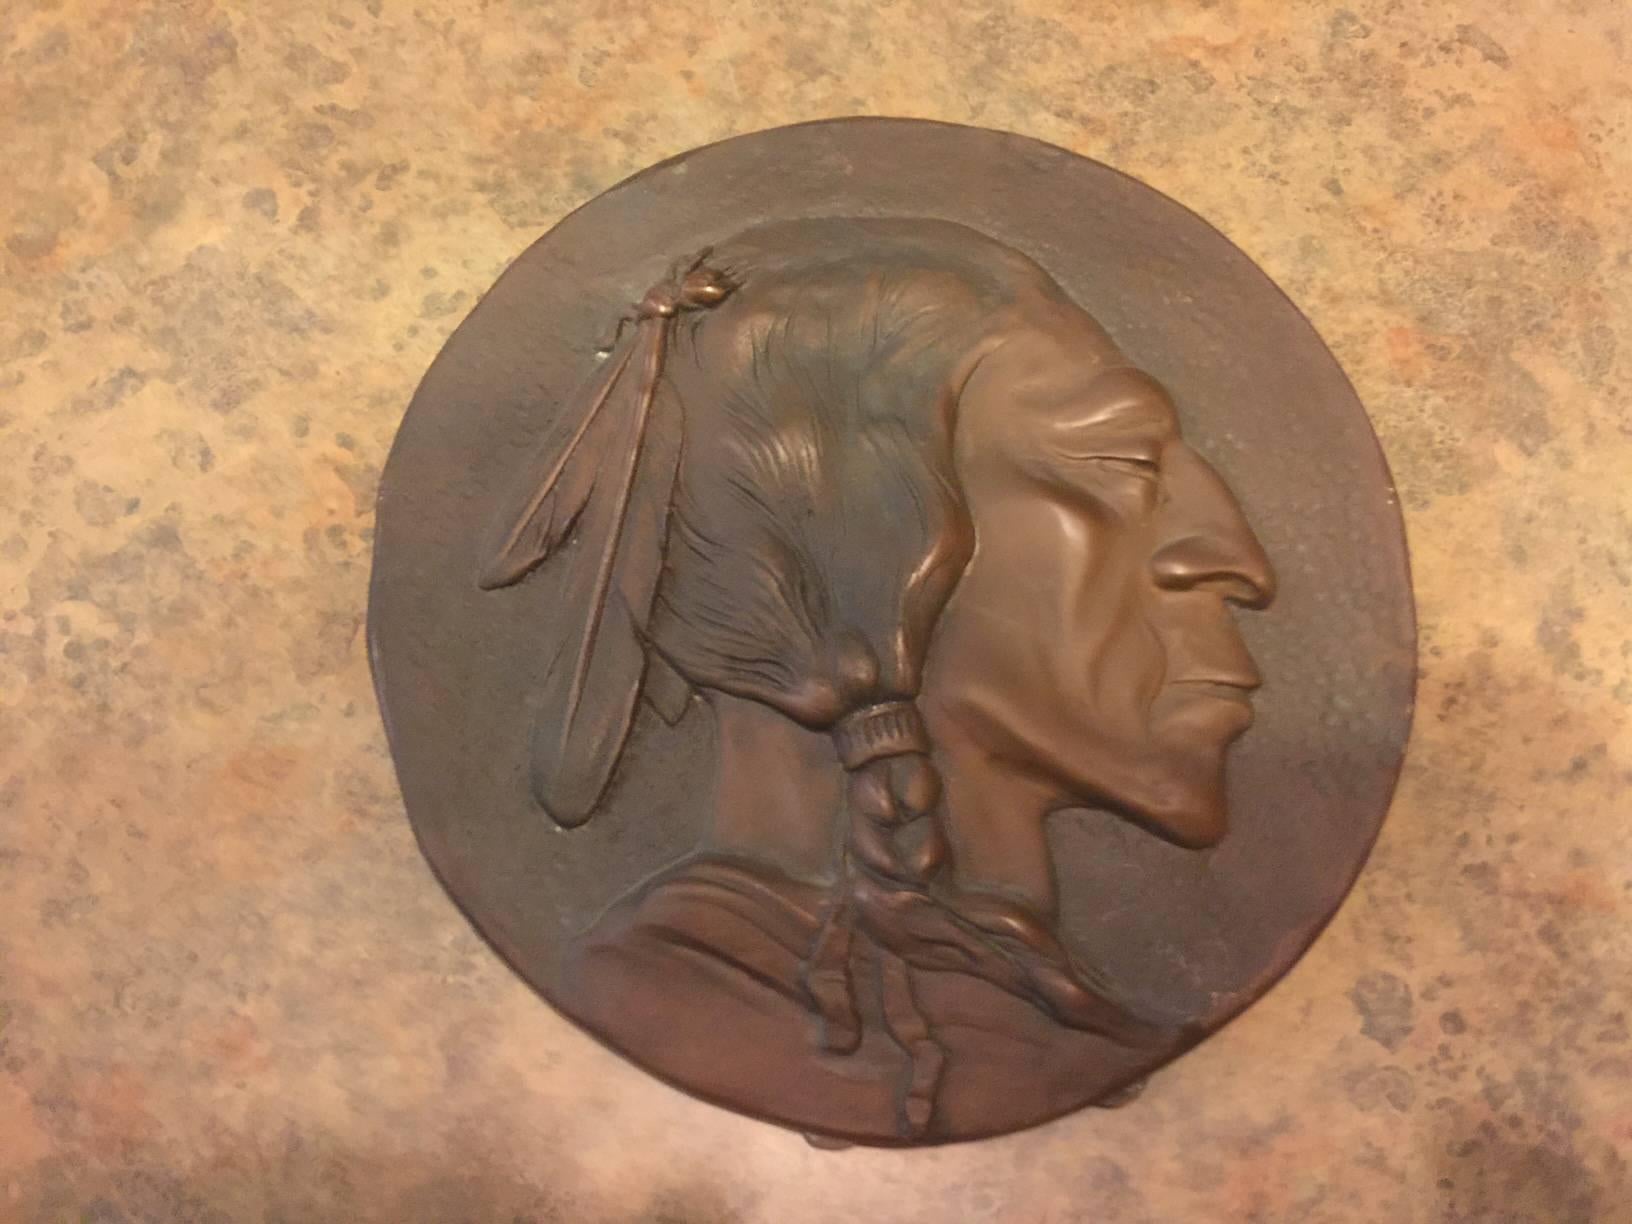 Very unique bronze plaque with stand resembling the Indian head buffalo nickel created by James Earle Fraser. The piece is 8.5" in diameter and has a wonderful patina.